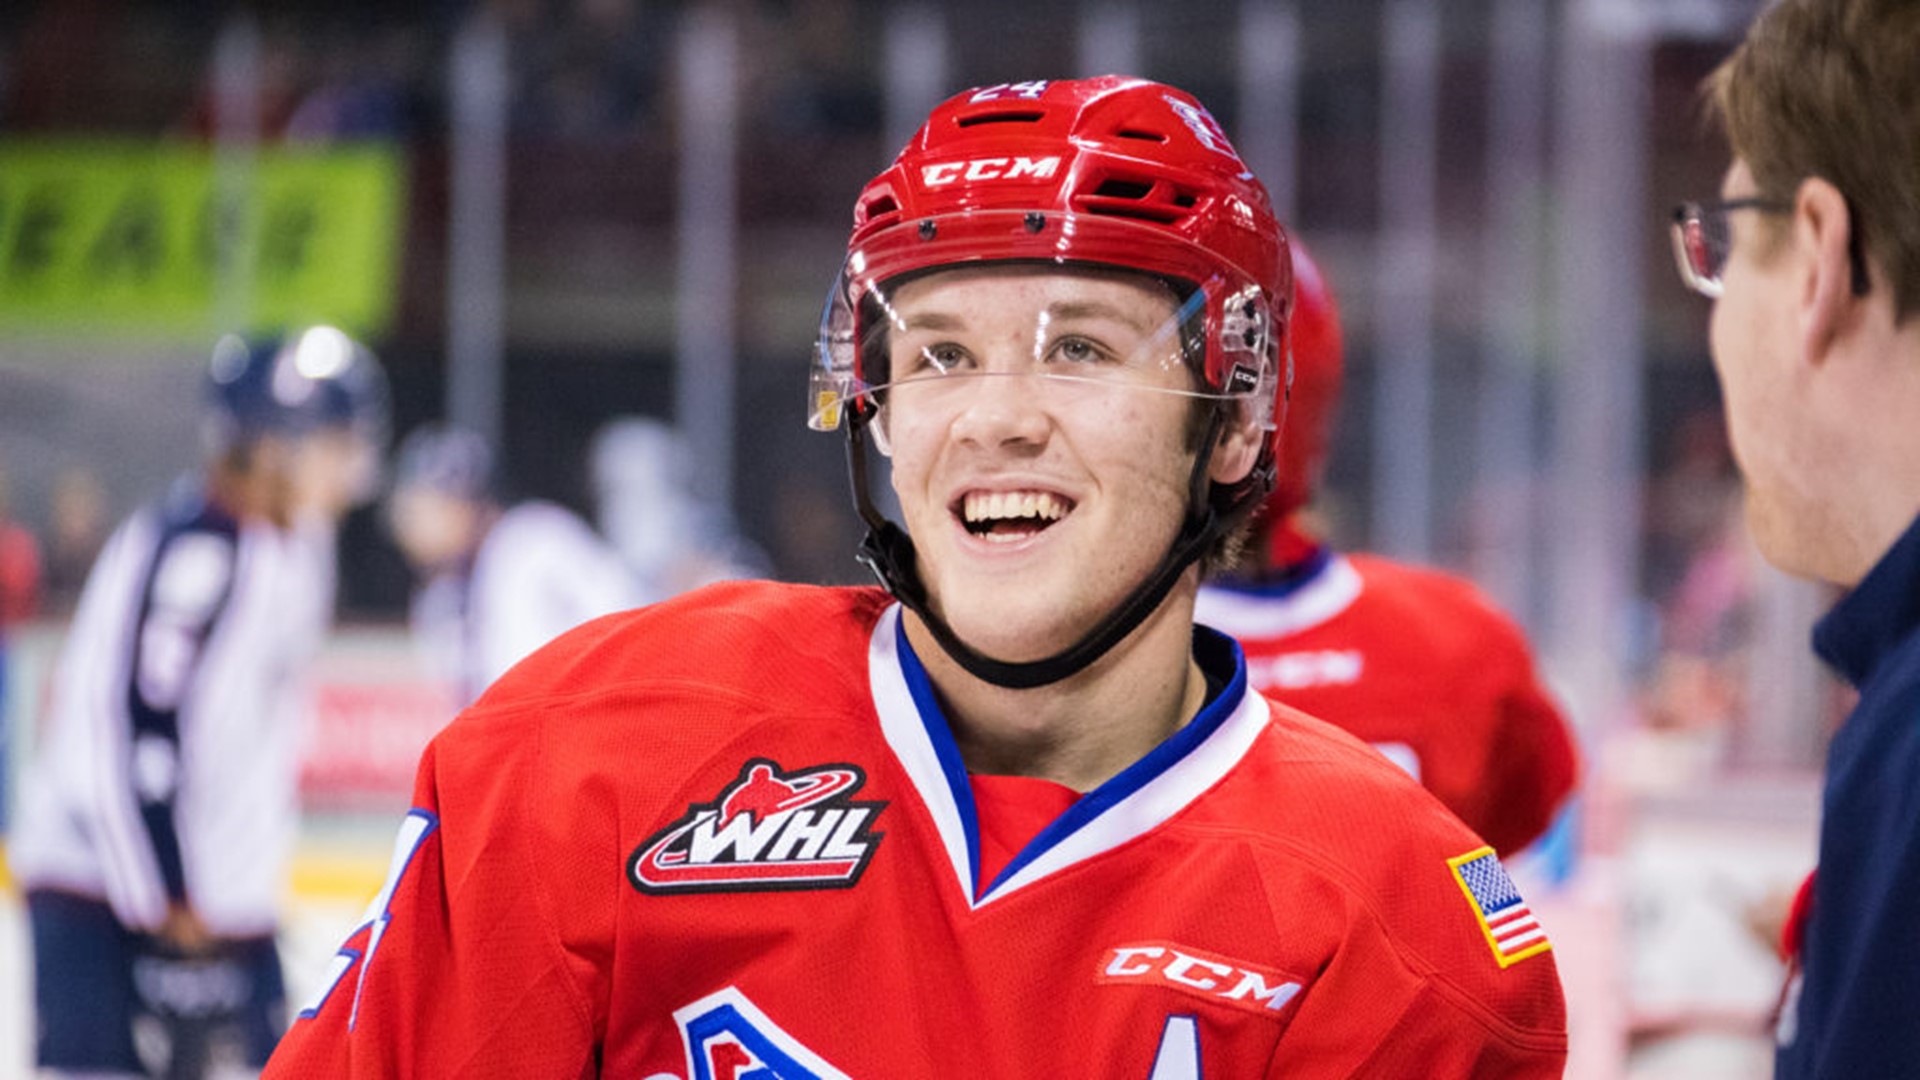 The Spokane Chiefs defenseman finishes his Spokane career as the 2nd best scoring defenseman in Chiefs history.